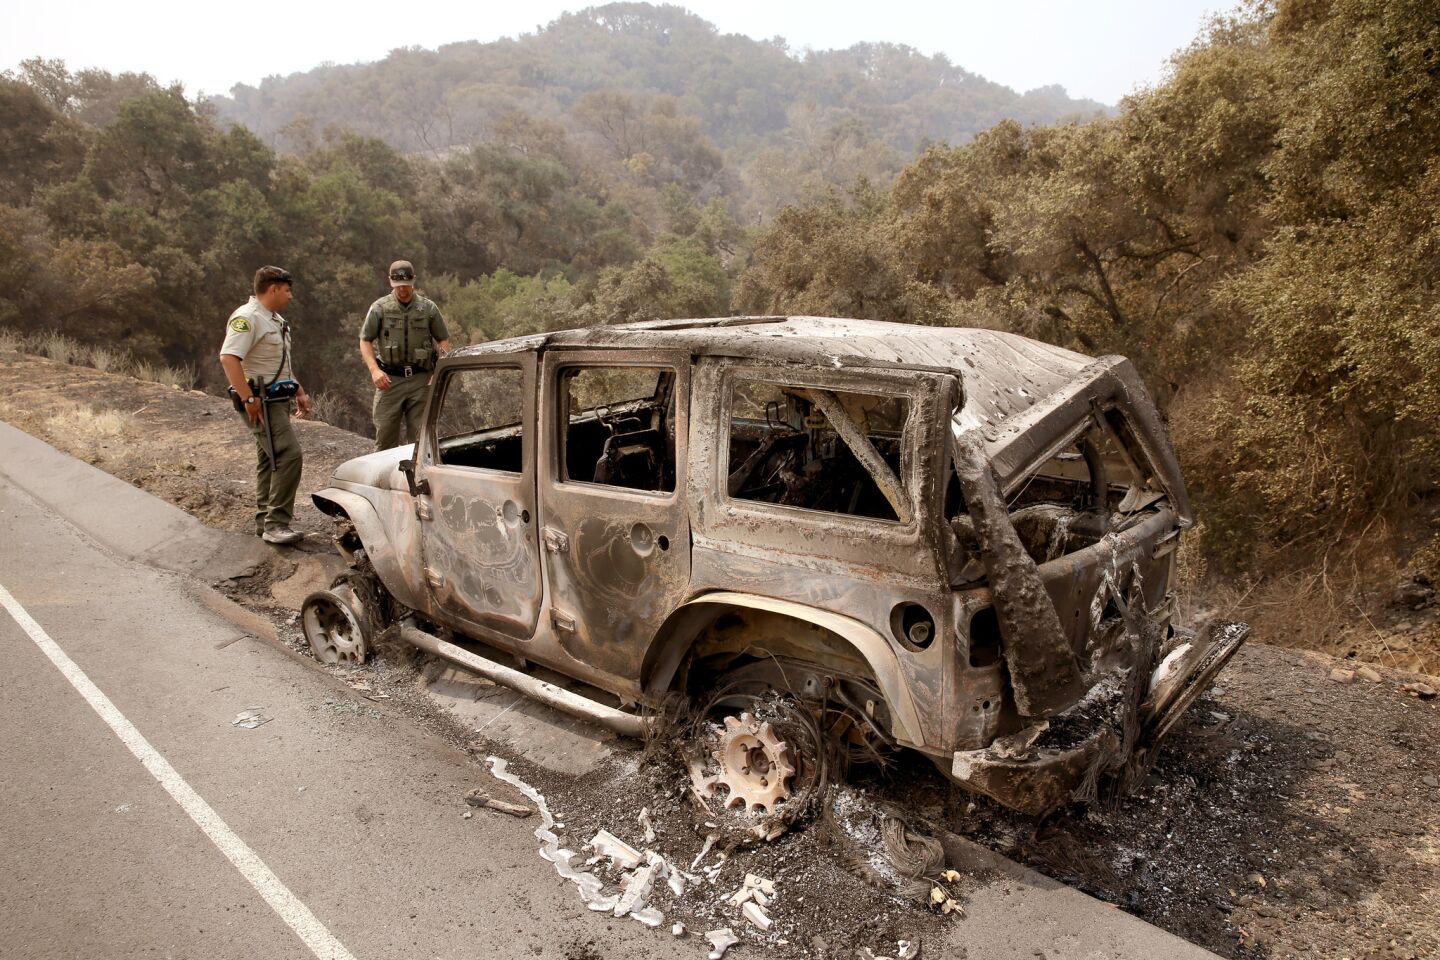 Santa Barbara Deputy Sheriff B. Bruening, left, and U.S. Fish & Wildlife game warden Max Magleby view a jeep that was abandoned and scorched by the Whittier fire along State Route 154 in the Los Padres National Forest near Lake Cachuma.